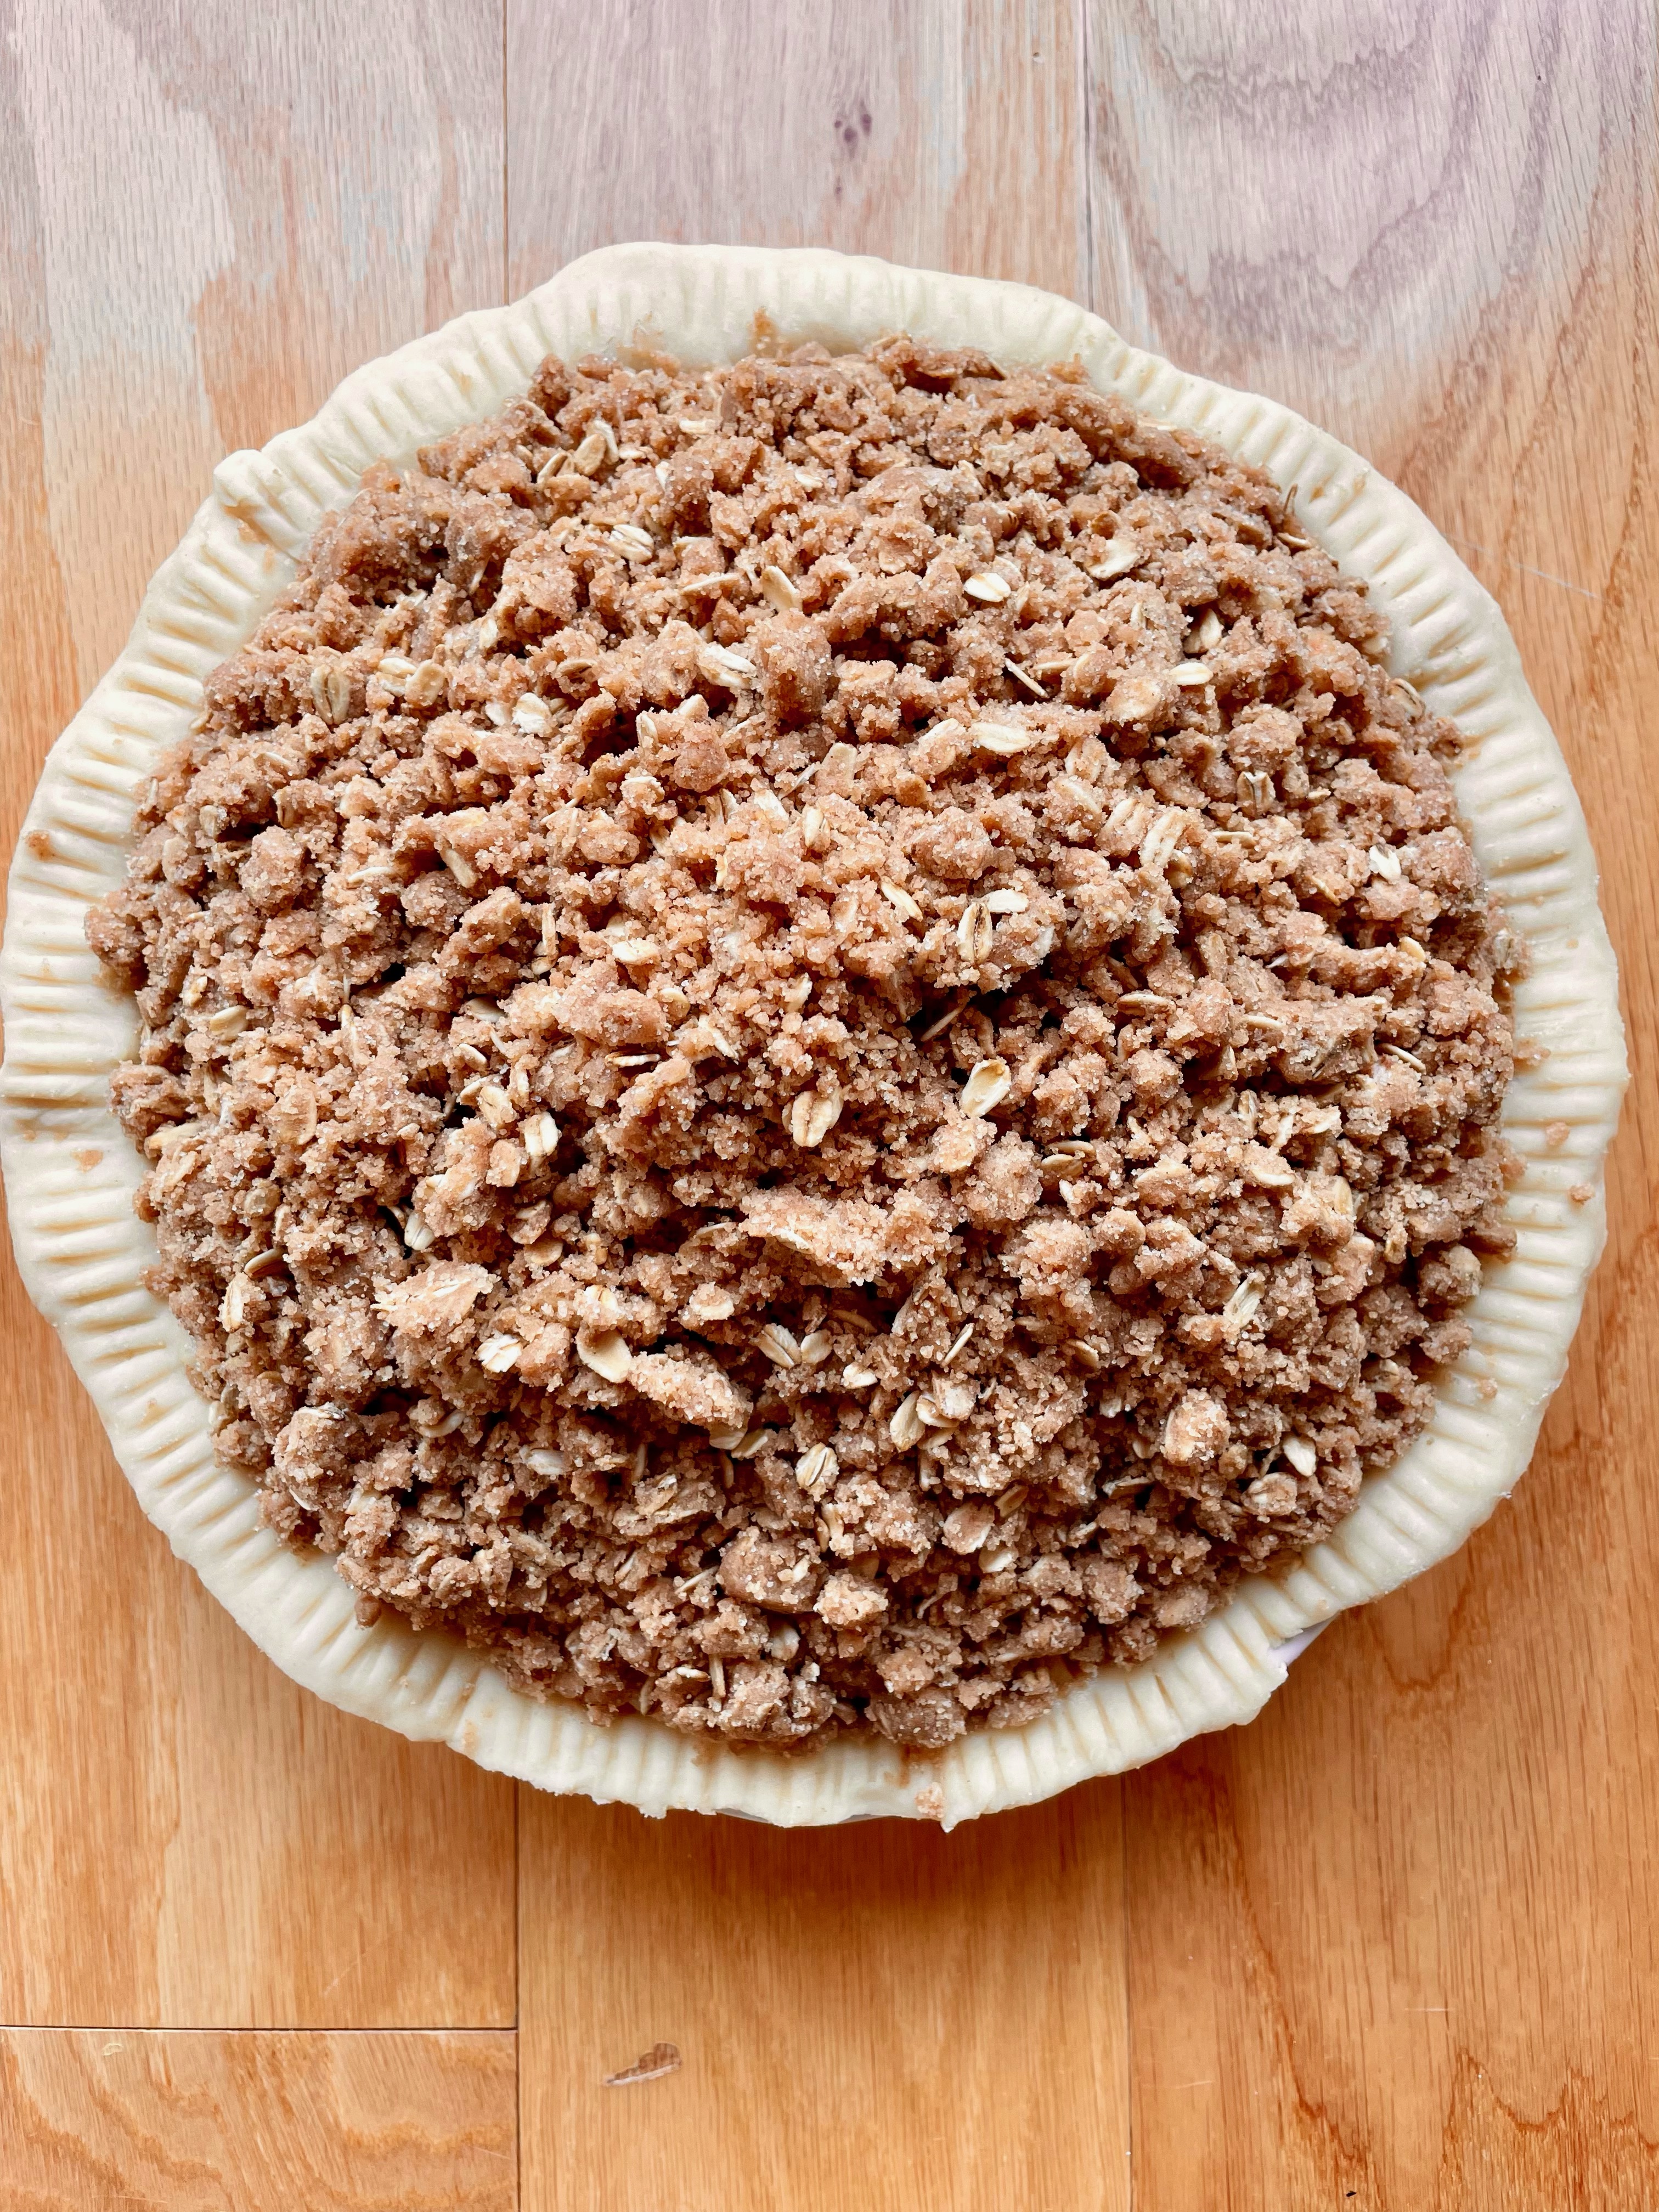 Unbaked Dutch apple pie with a crumb topping and traditional bottom pie crust